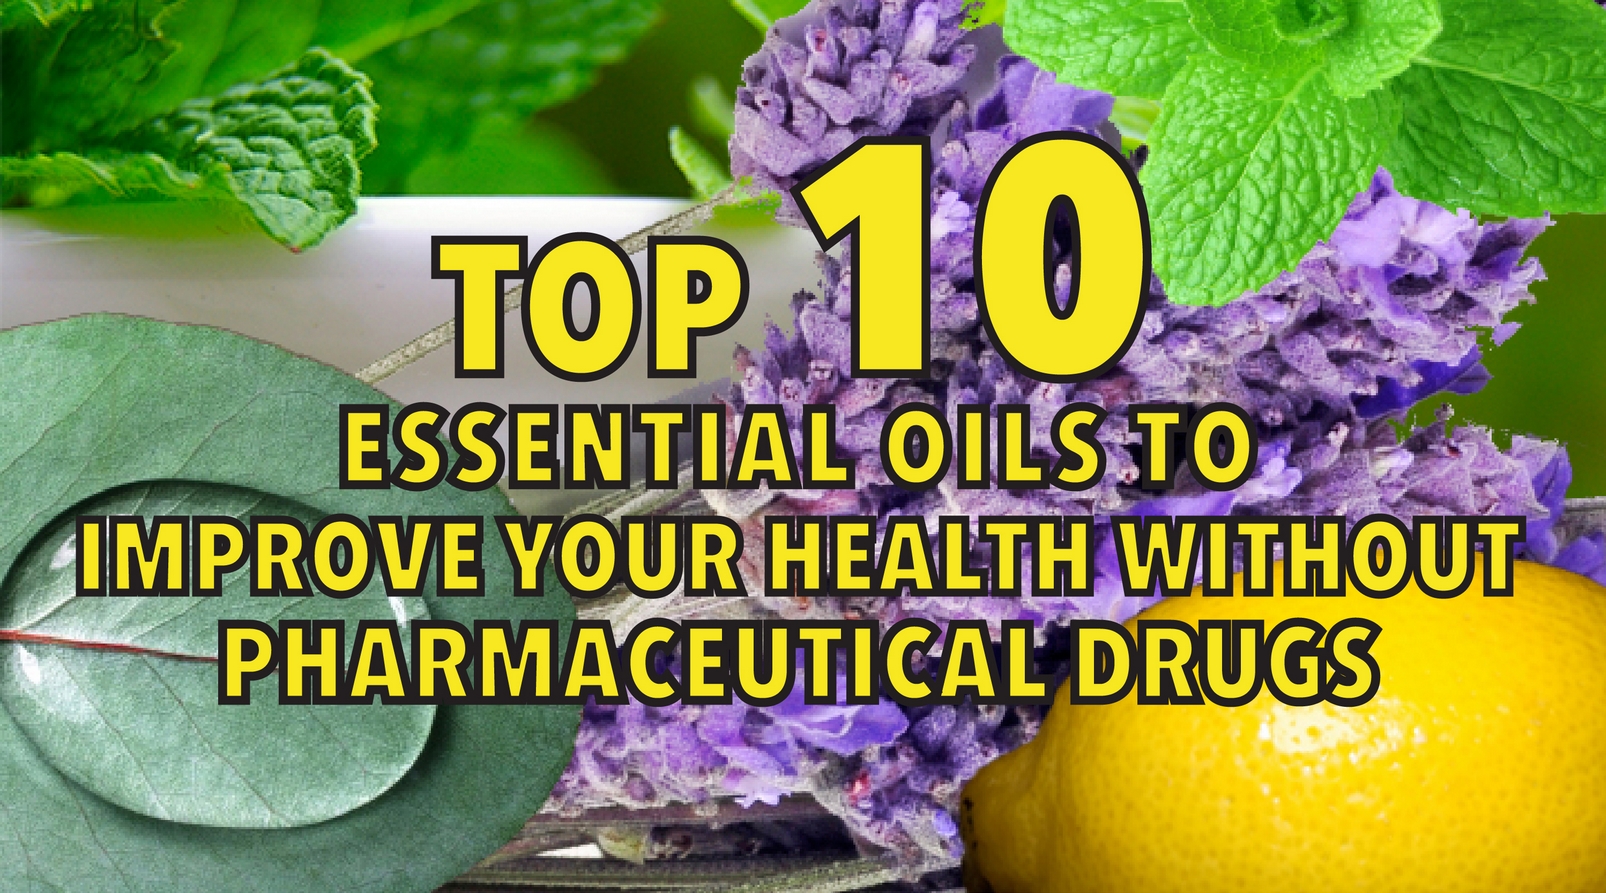 Top 10 essential oils to improve your health without pharmaceutical drugs